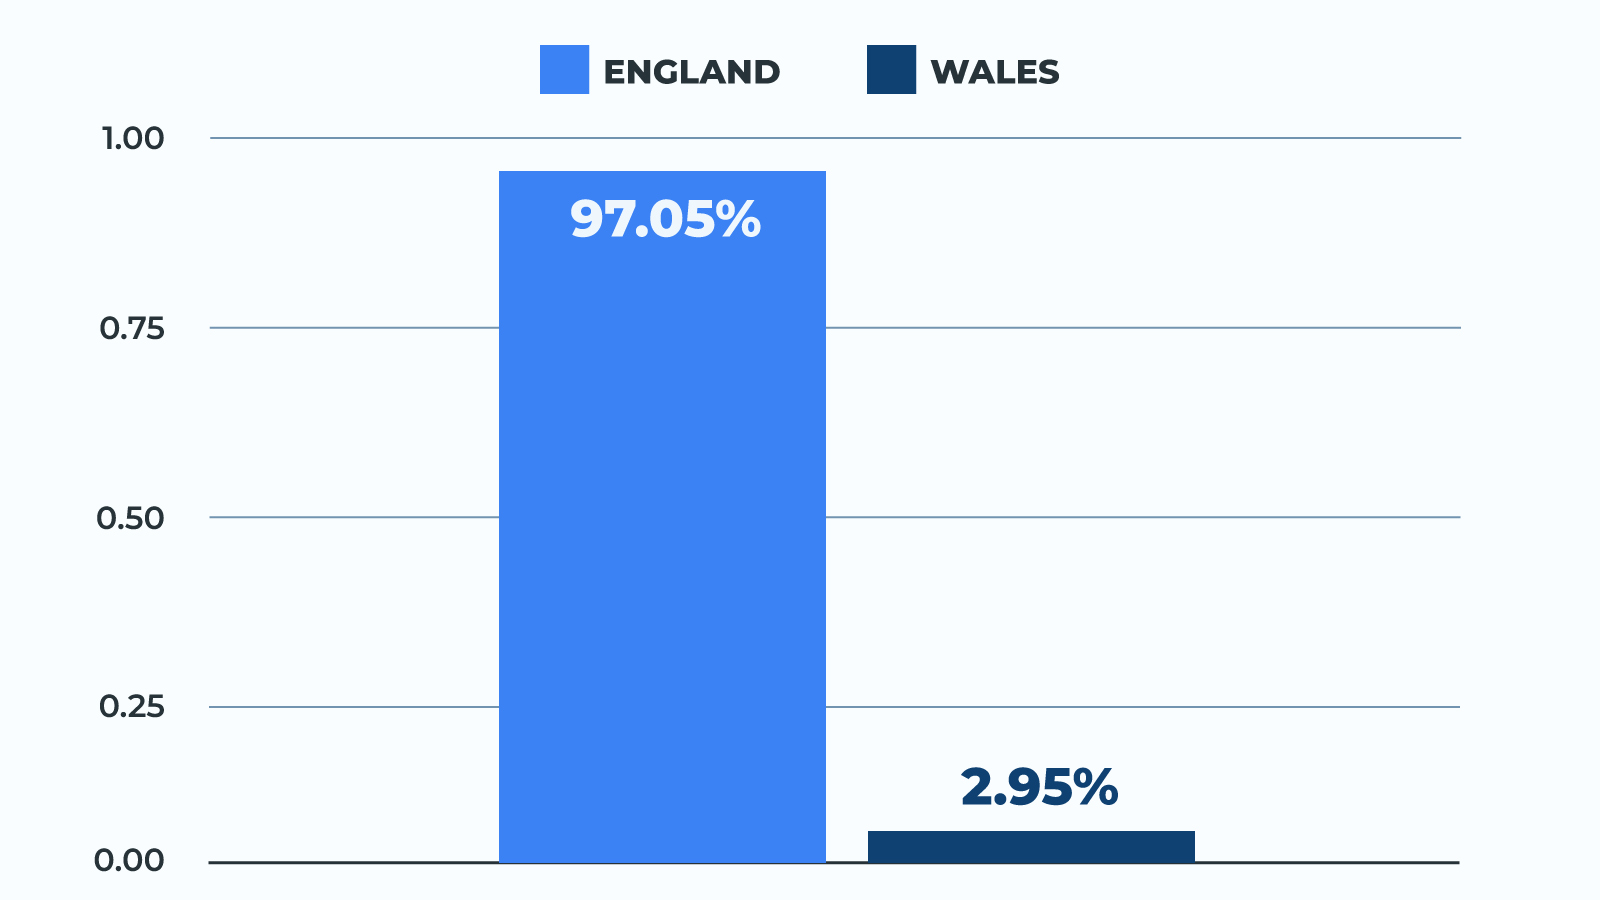 Share of vehicle crime in England and Wales